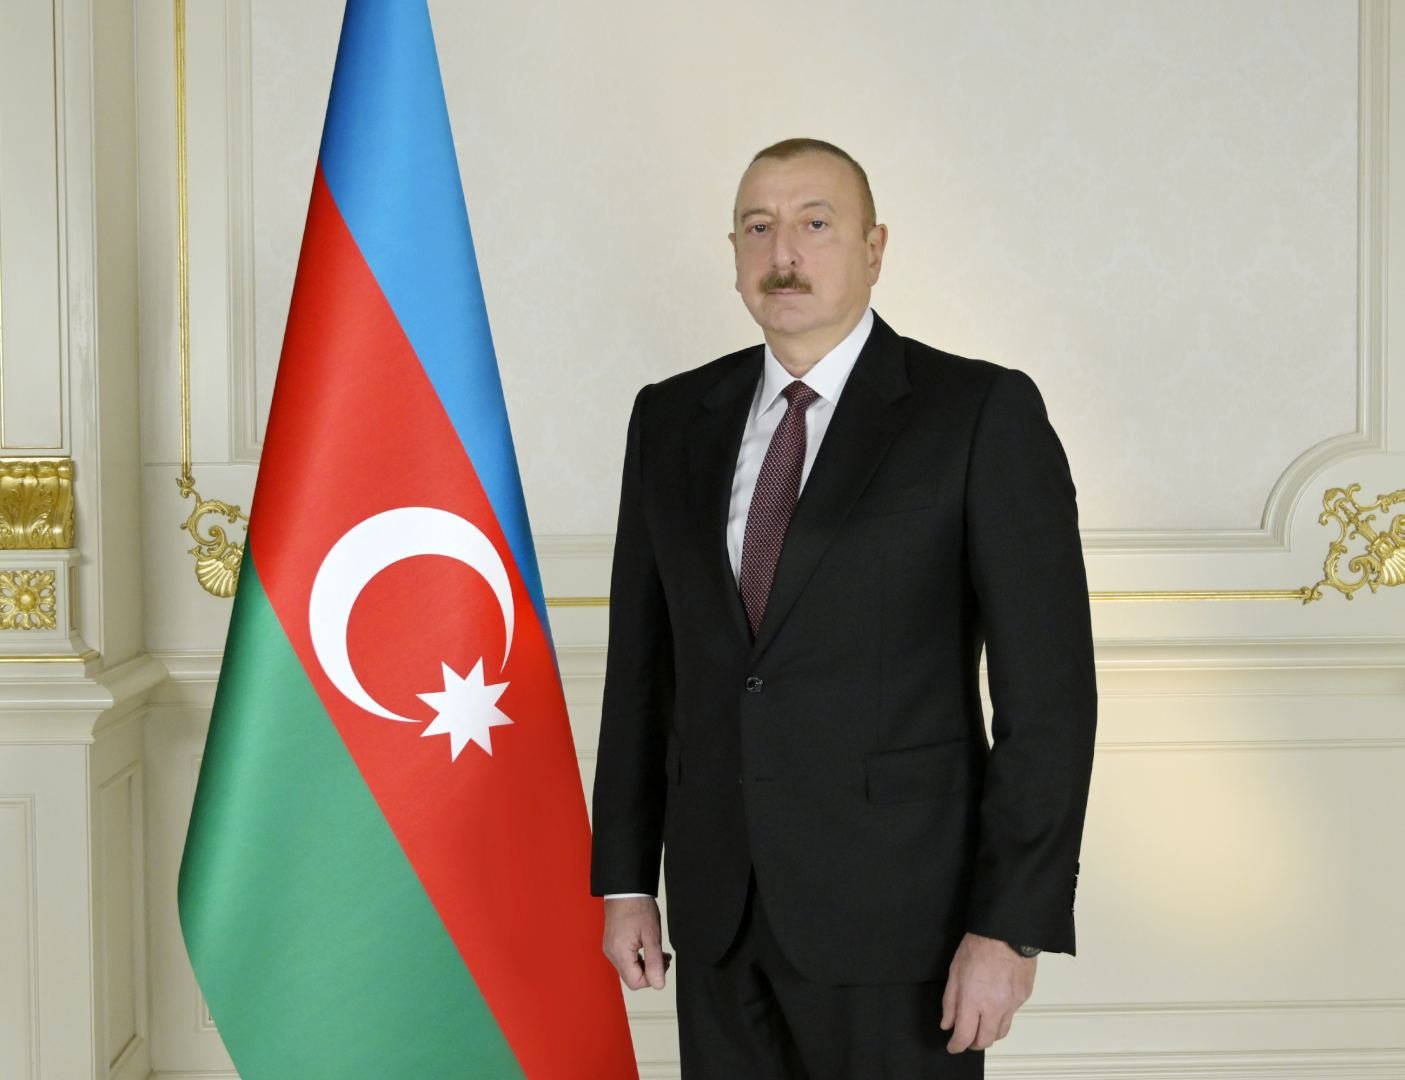 Events of two and half years should awaken Armenians from their dreams - President Ilham Aliyev